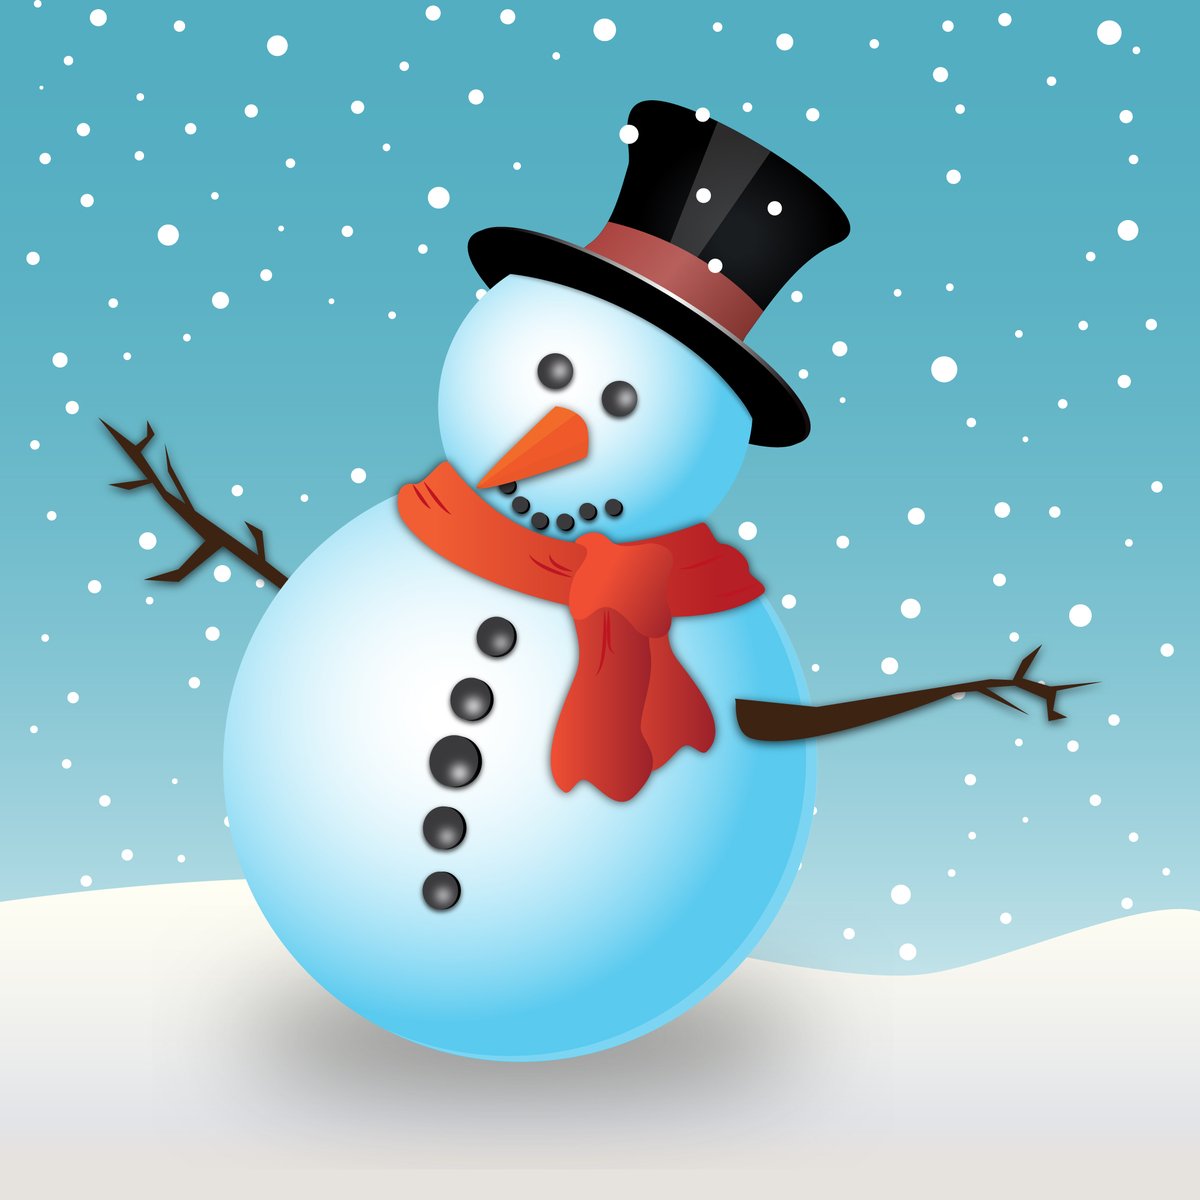 a snowman with hat, scarf and scarf on his neck